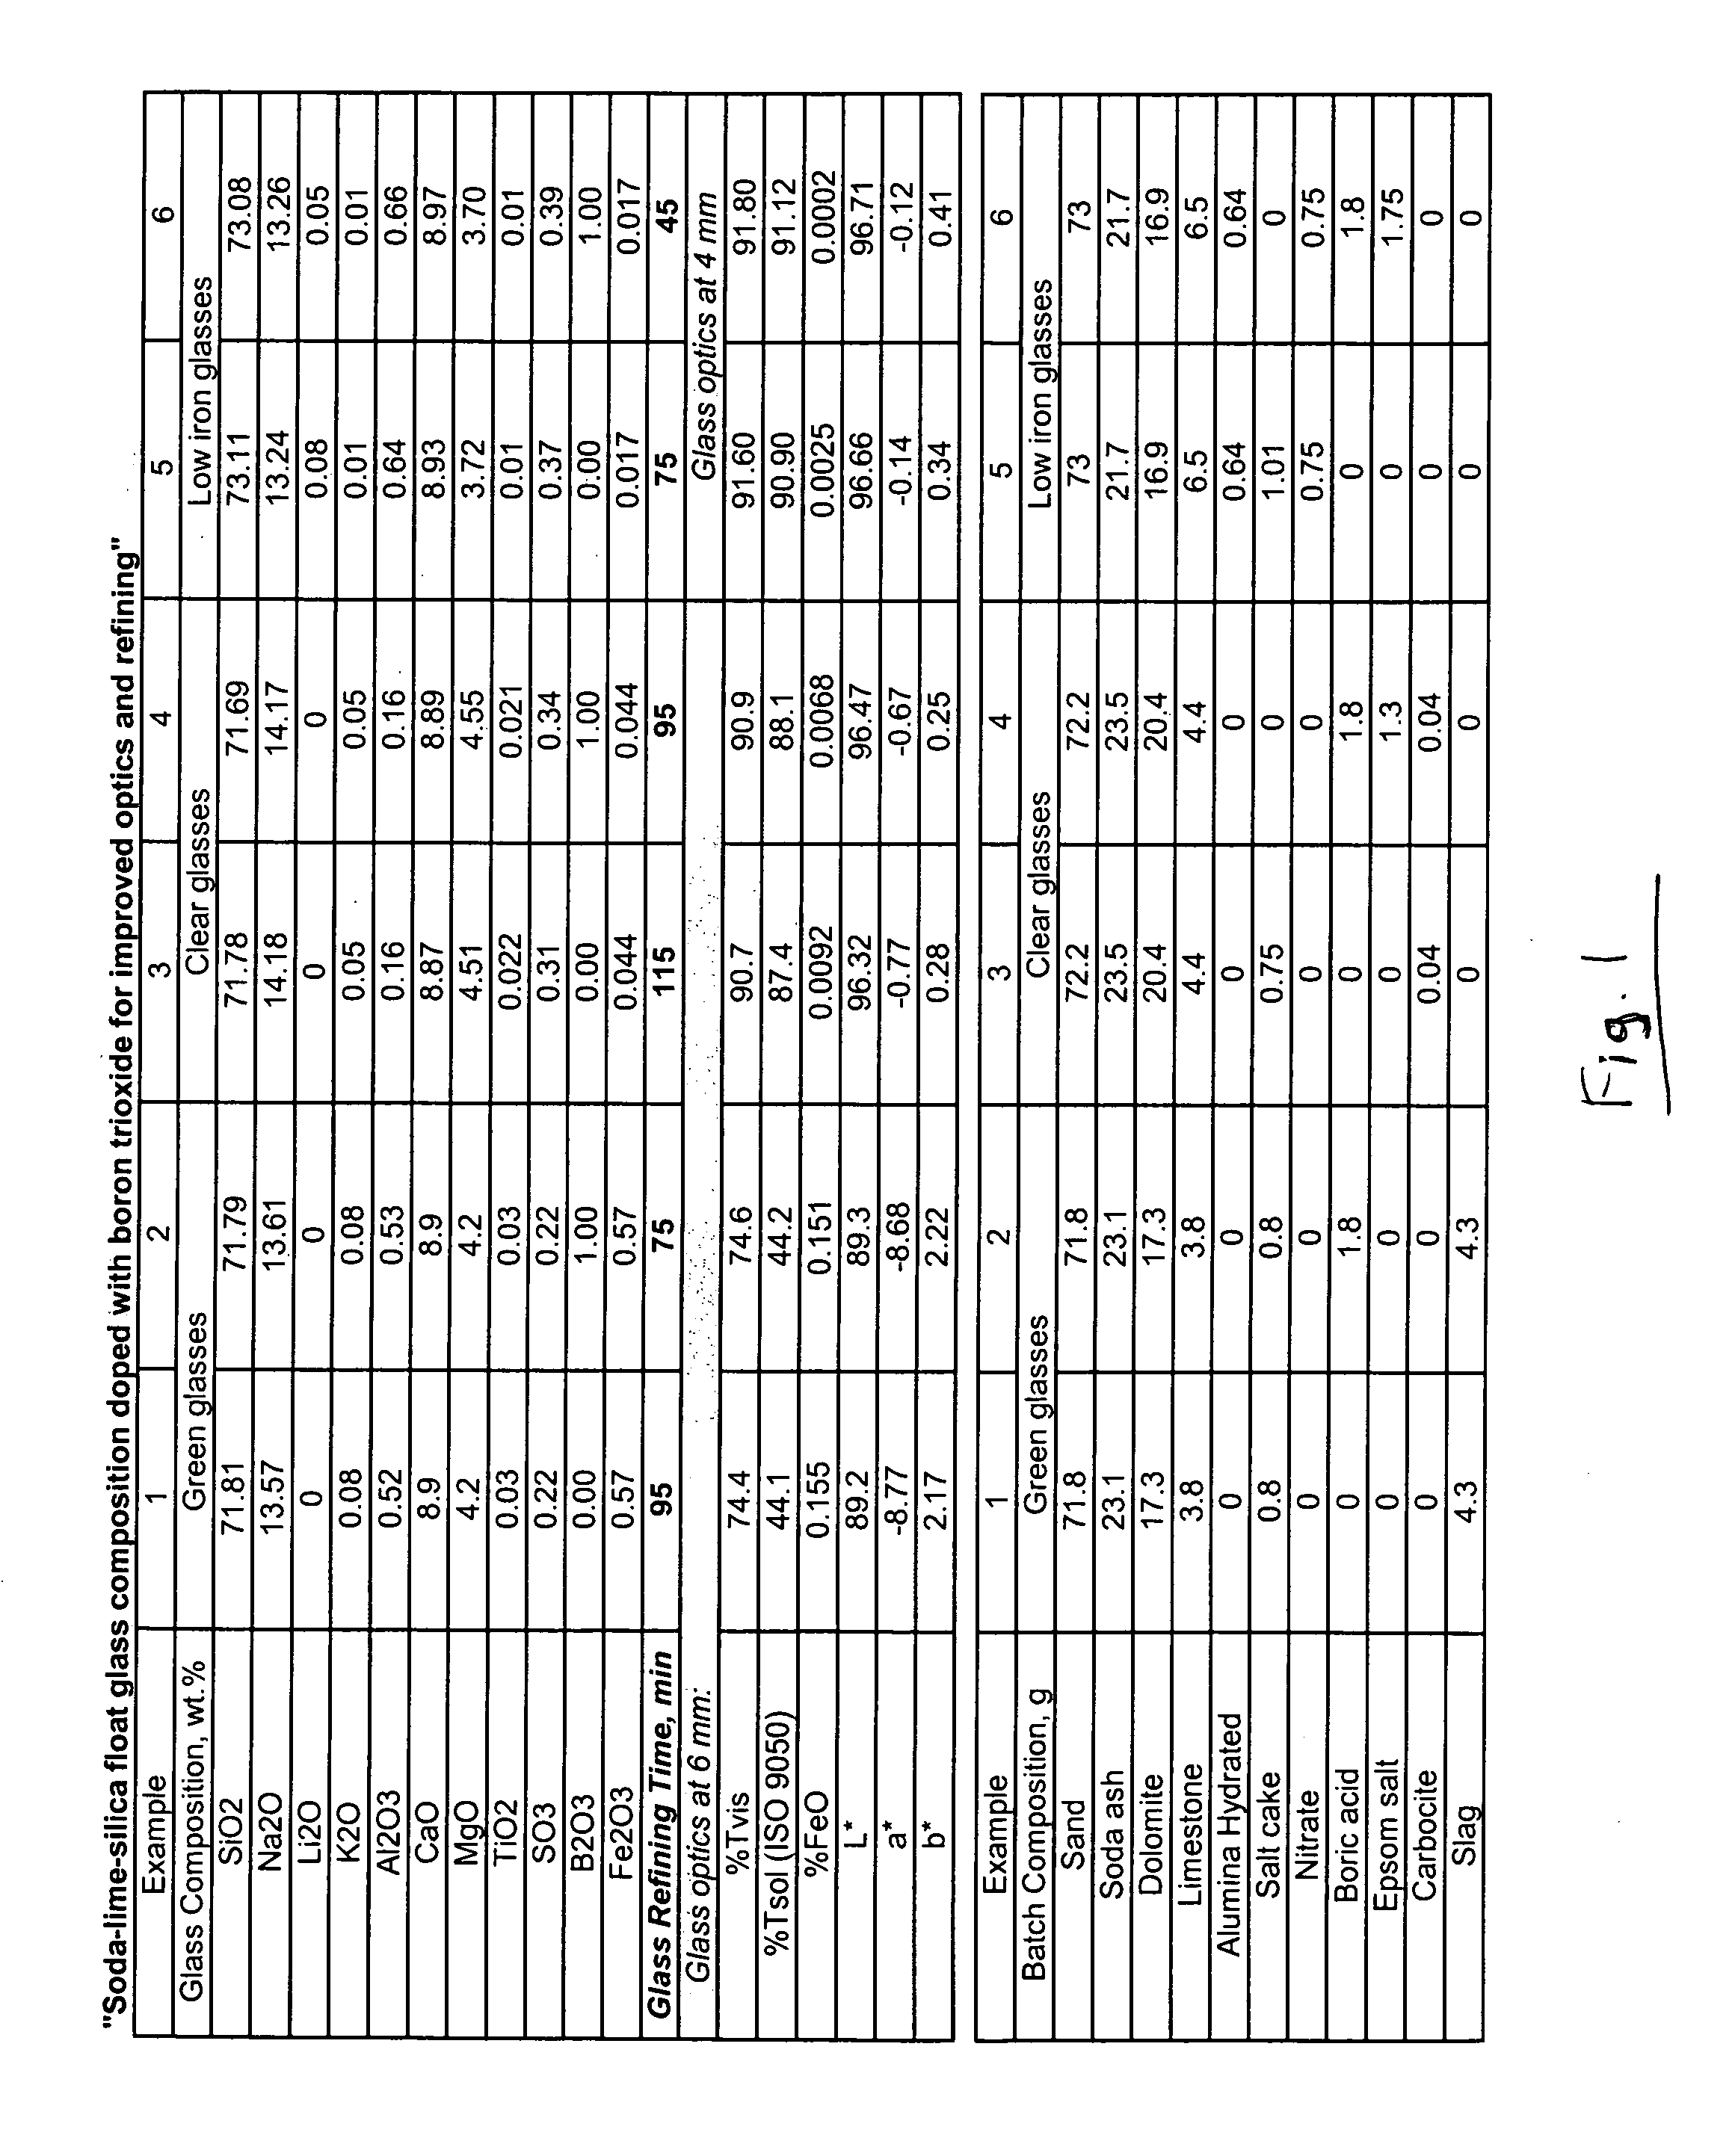 Method of making glass including use of boron oxide for reducing glass refining time